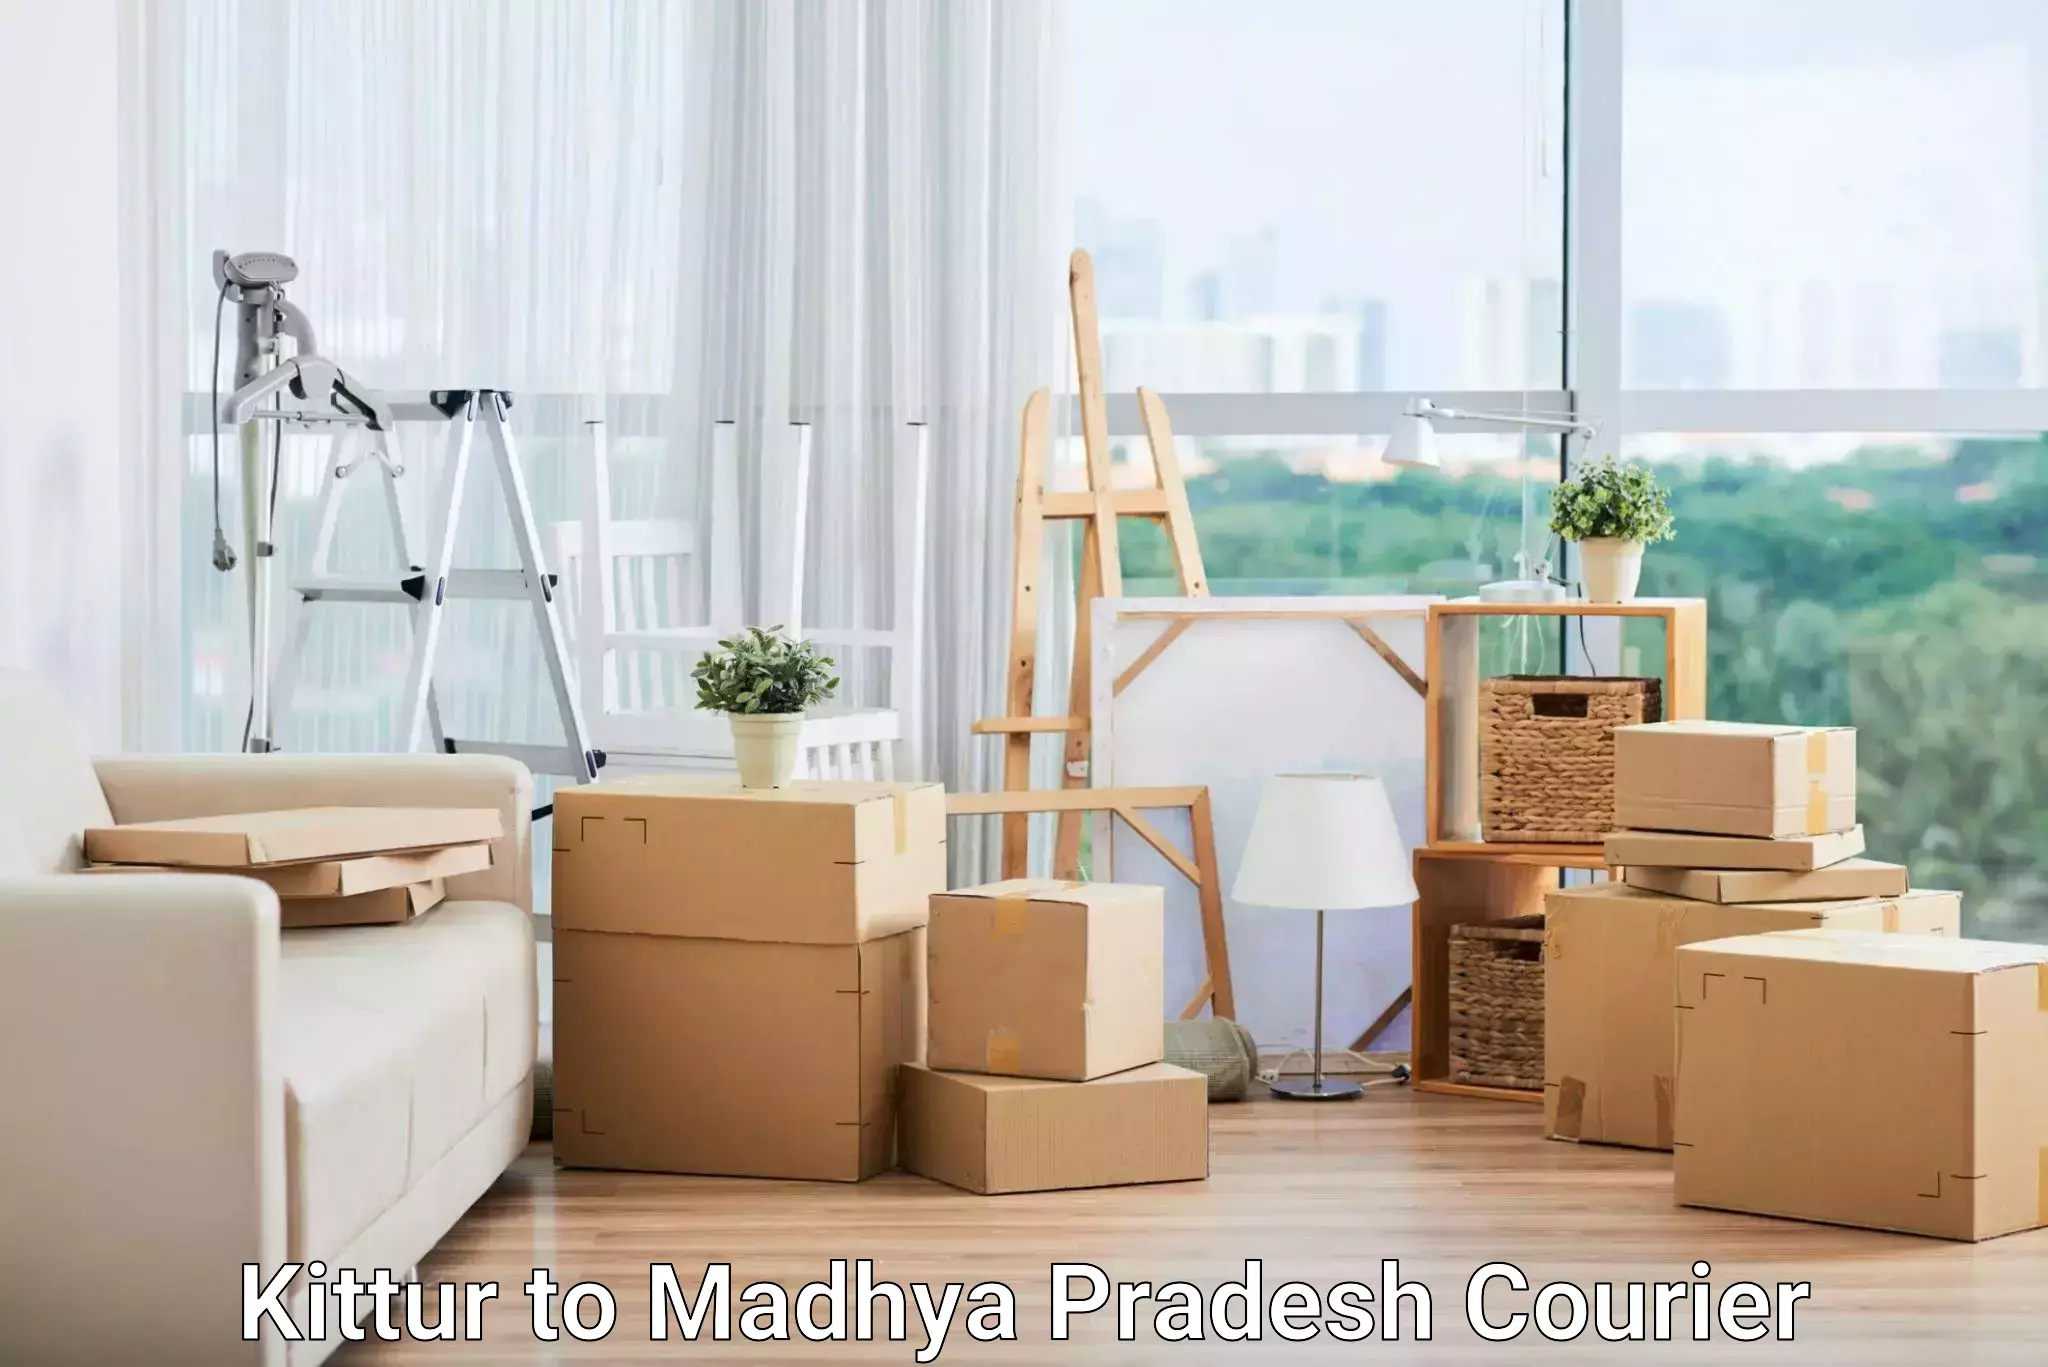 High-capacity parcel service Kittur to Bhopal